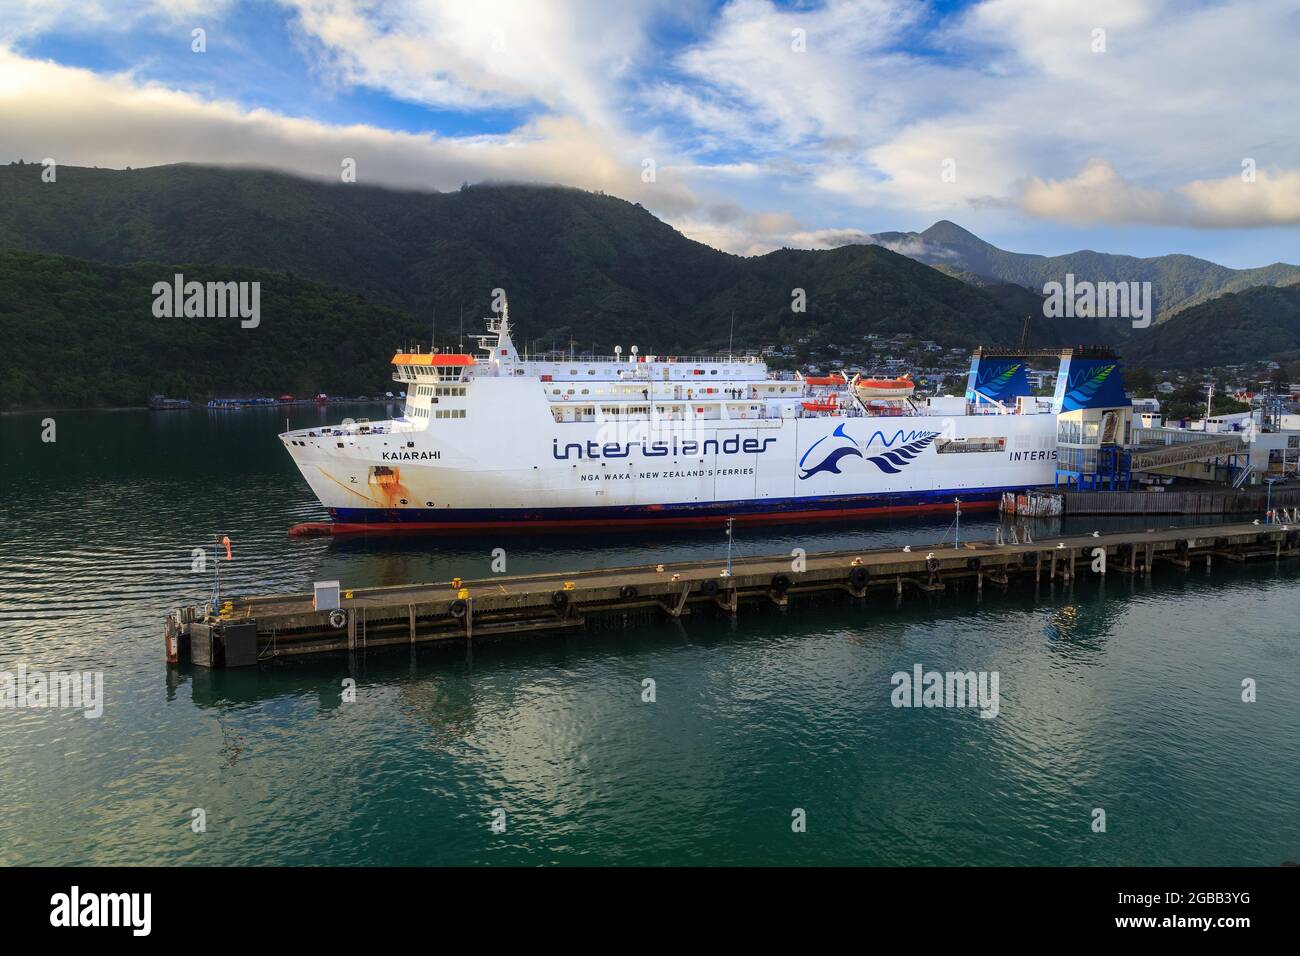 Picton, New Zealand. The Interislander ferry 'Kaiarahi' in Picton Harbour, after crossing Cook Strait Stock Photo